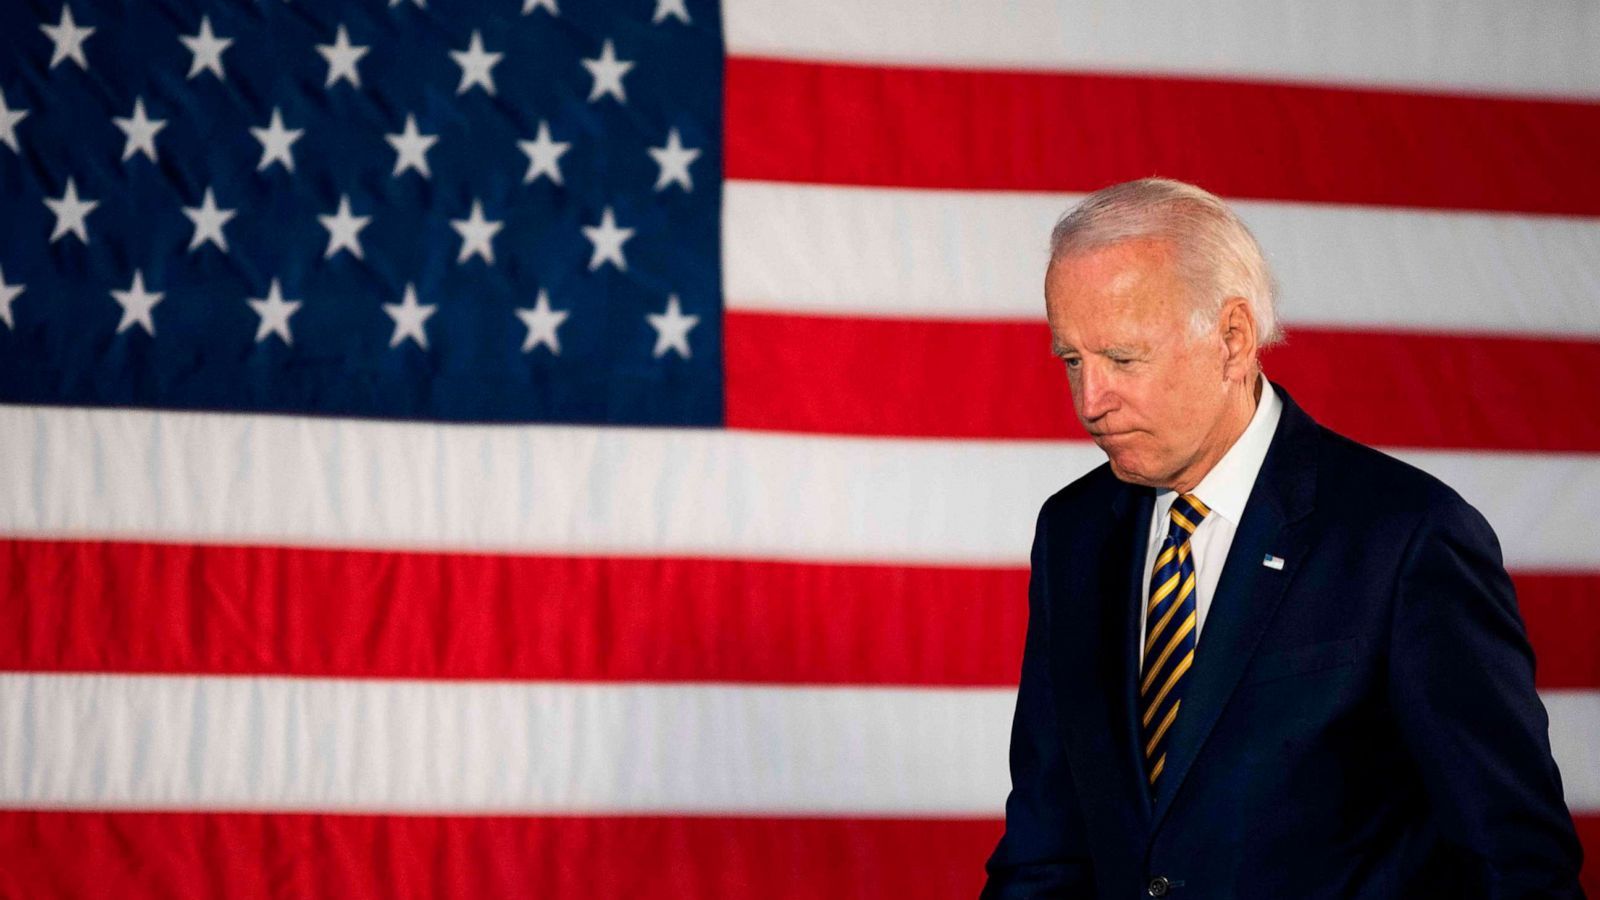 The Note: Biden's problems talking about race surface again